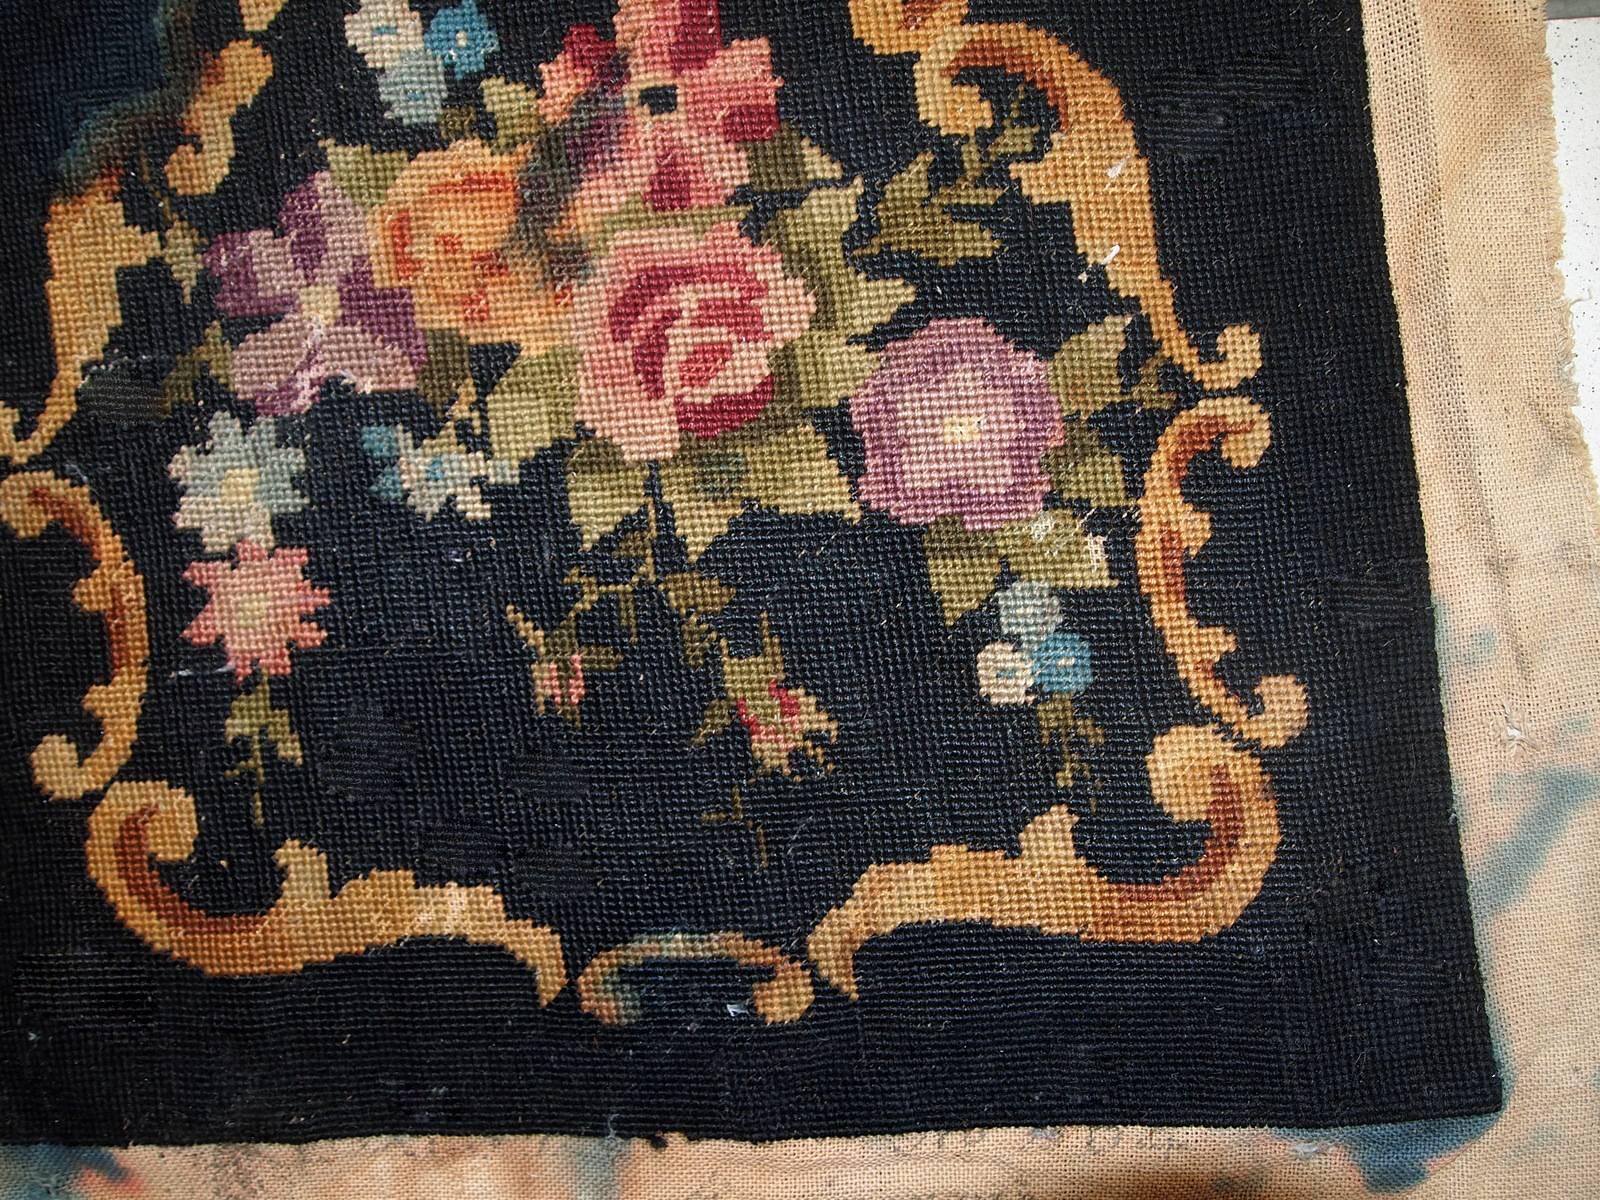 Handmade antique unframed English needlepoint in black color with floral design. The size of actual needlepoint is 1.3' x 1.4' (42cm x 45cm) and with the sides is 2' x 2.2' (63cm x 68cm). It is in original condition, it has some discolorations on